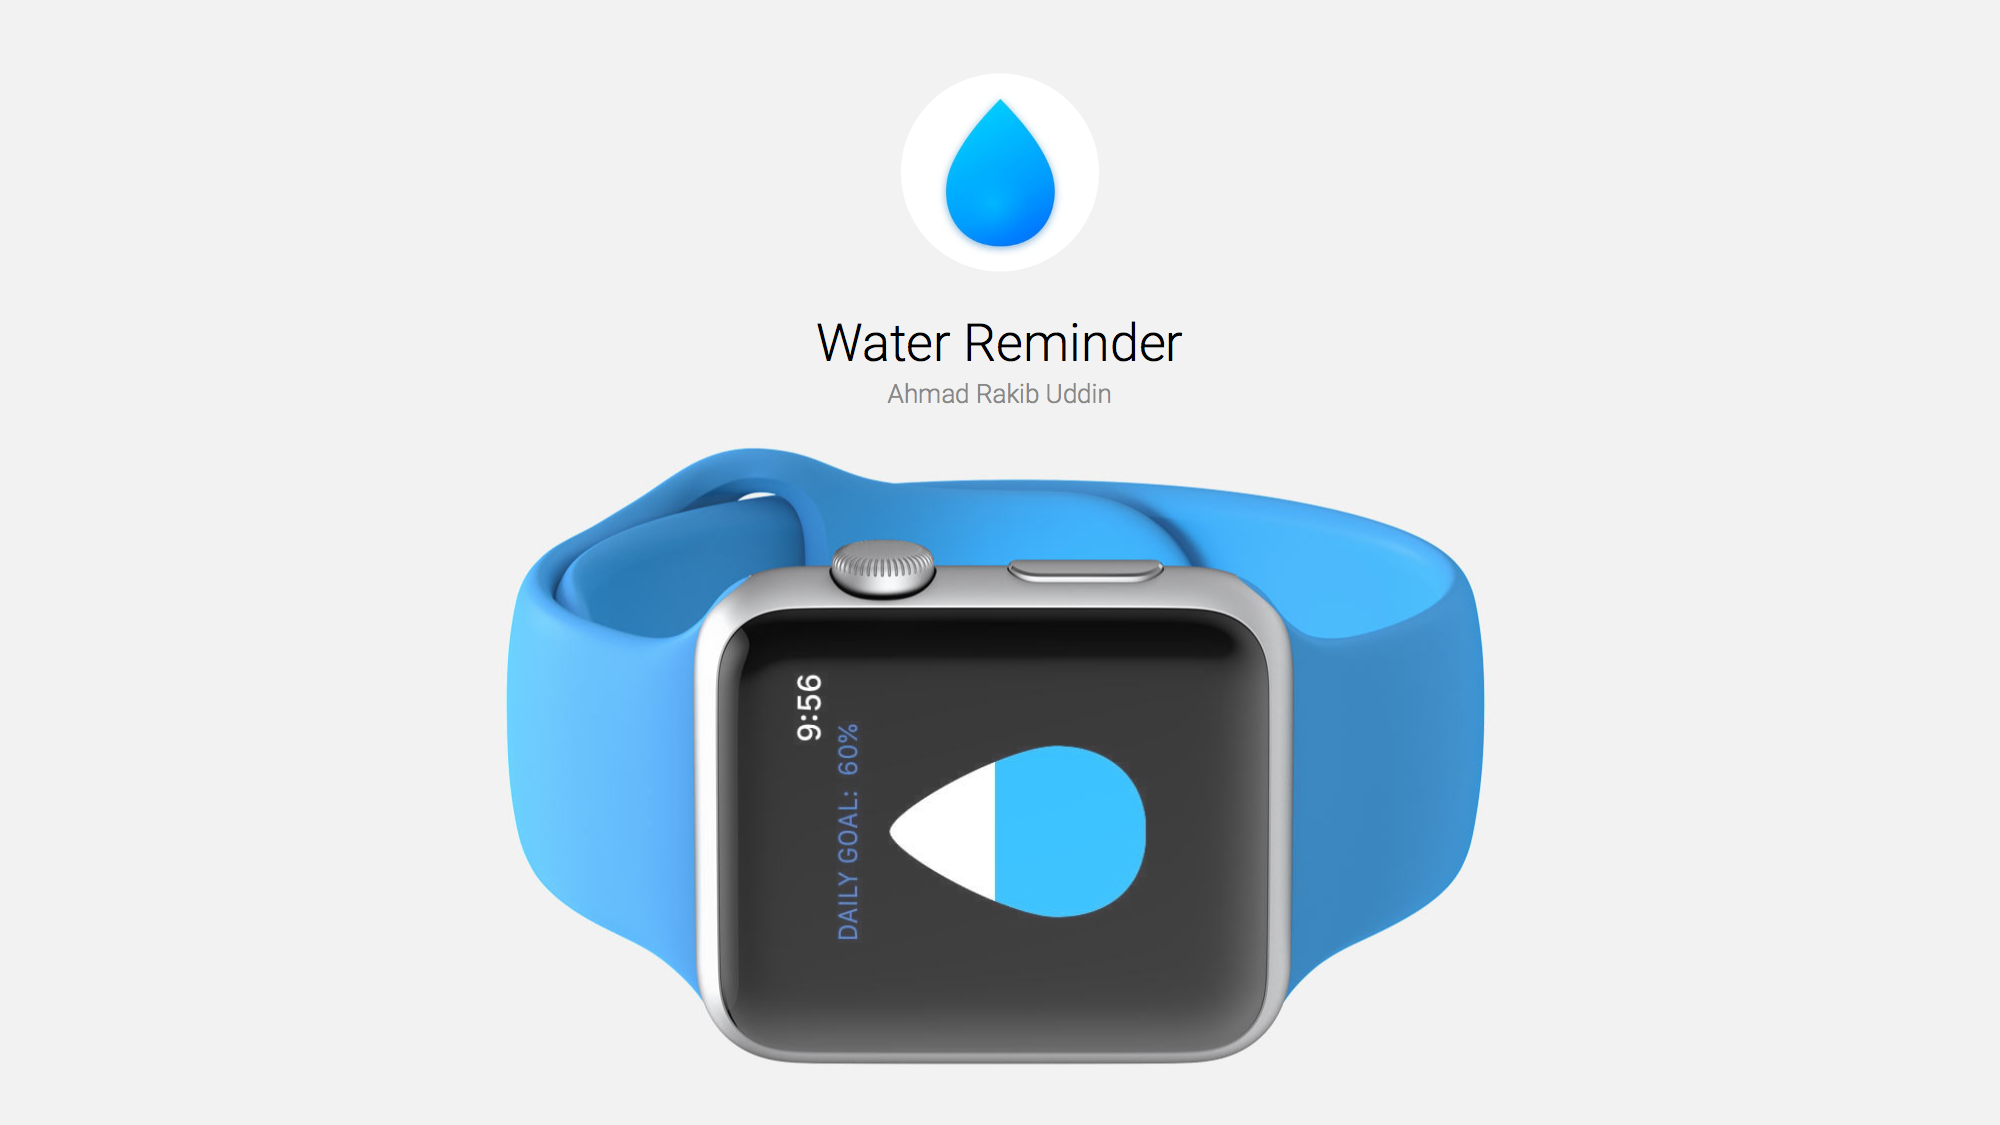 Water Reminder is a Simpler Hydration App